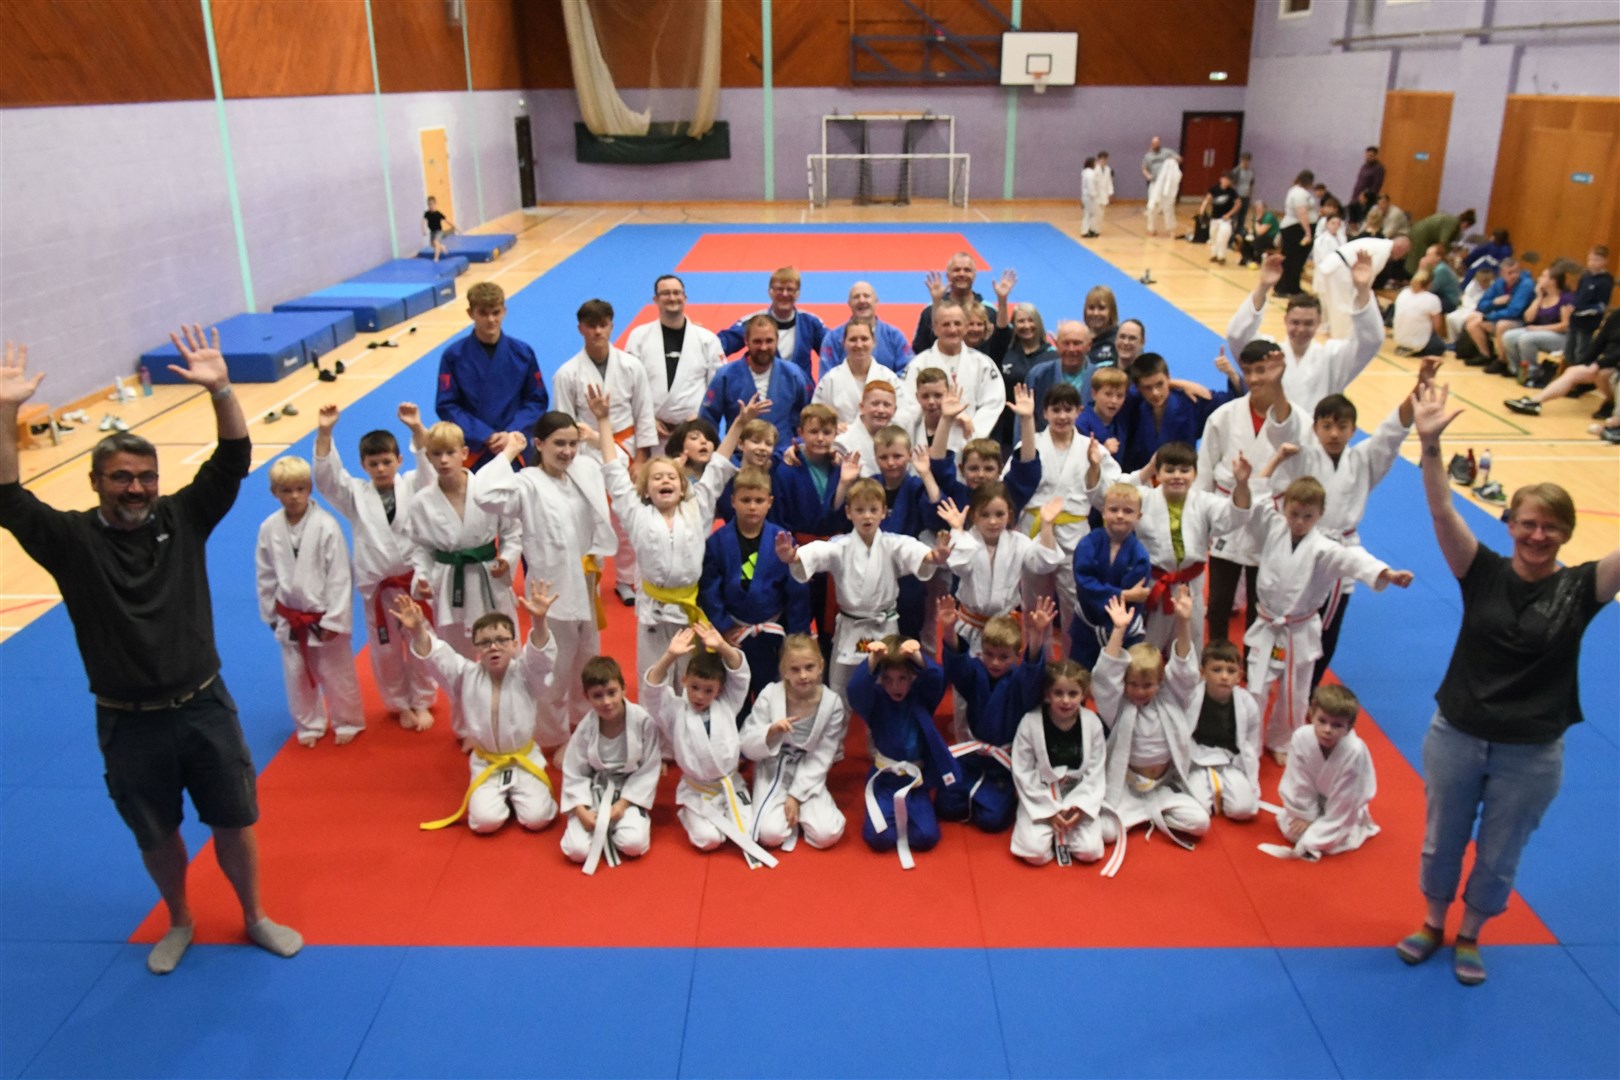 Invergordon Judo Club groupwith Mark Lancaster from Whyte & Mackay and Donna Smith from the Invergordon Development Trust. Picture: James Mackenzie.